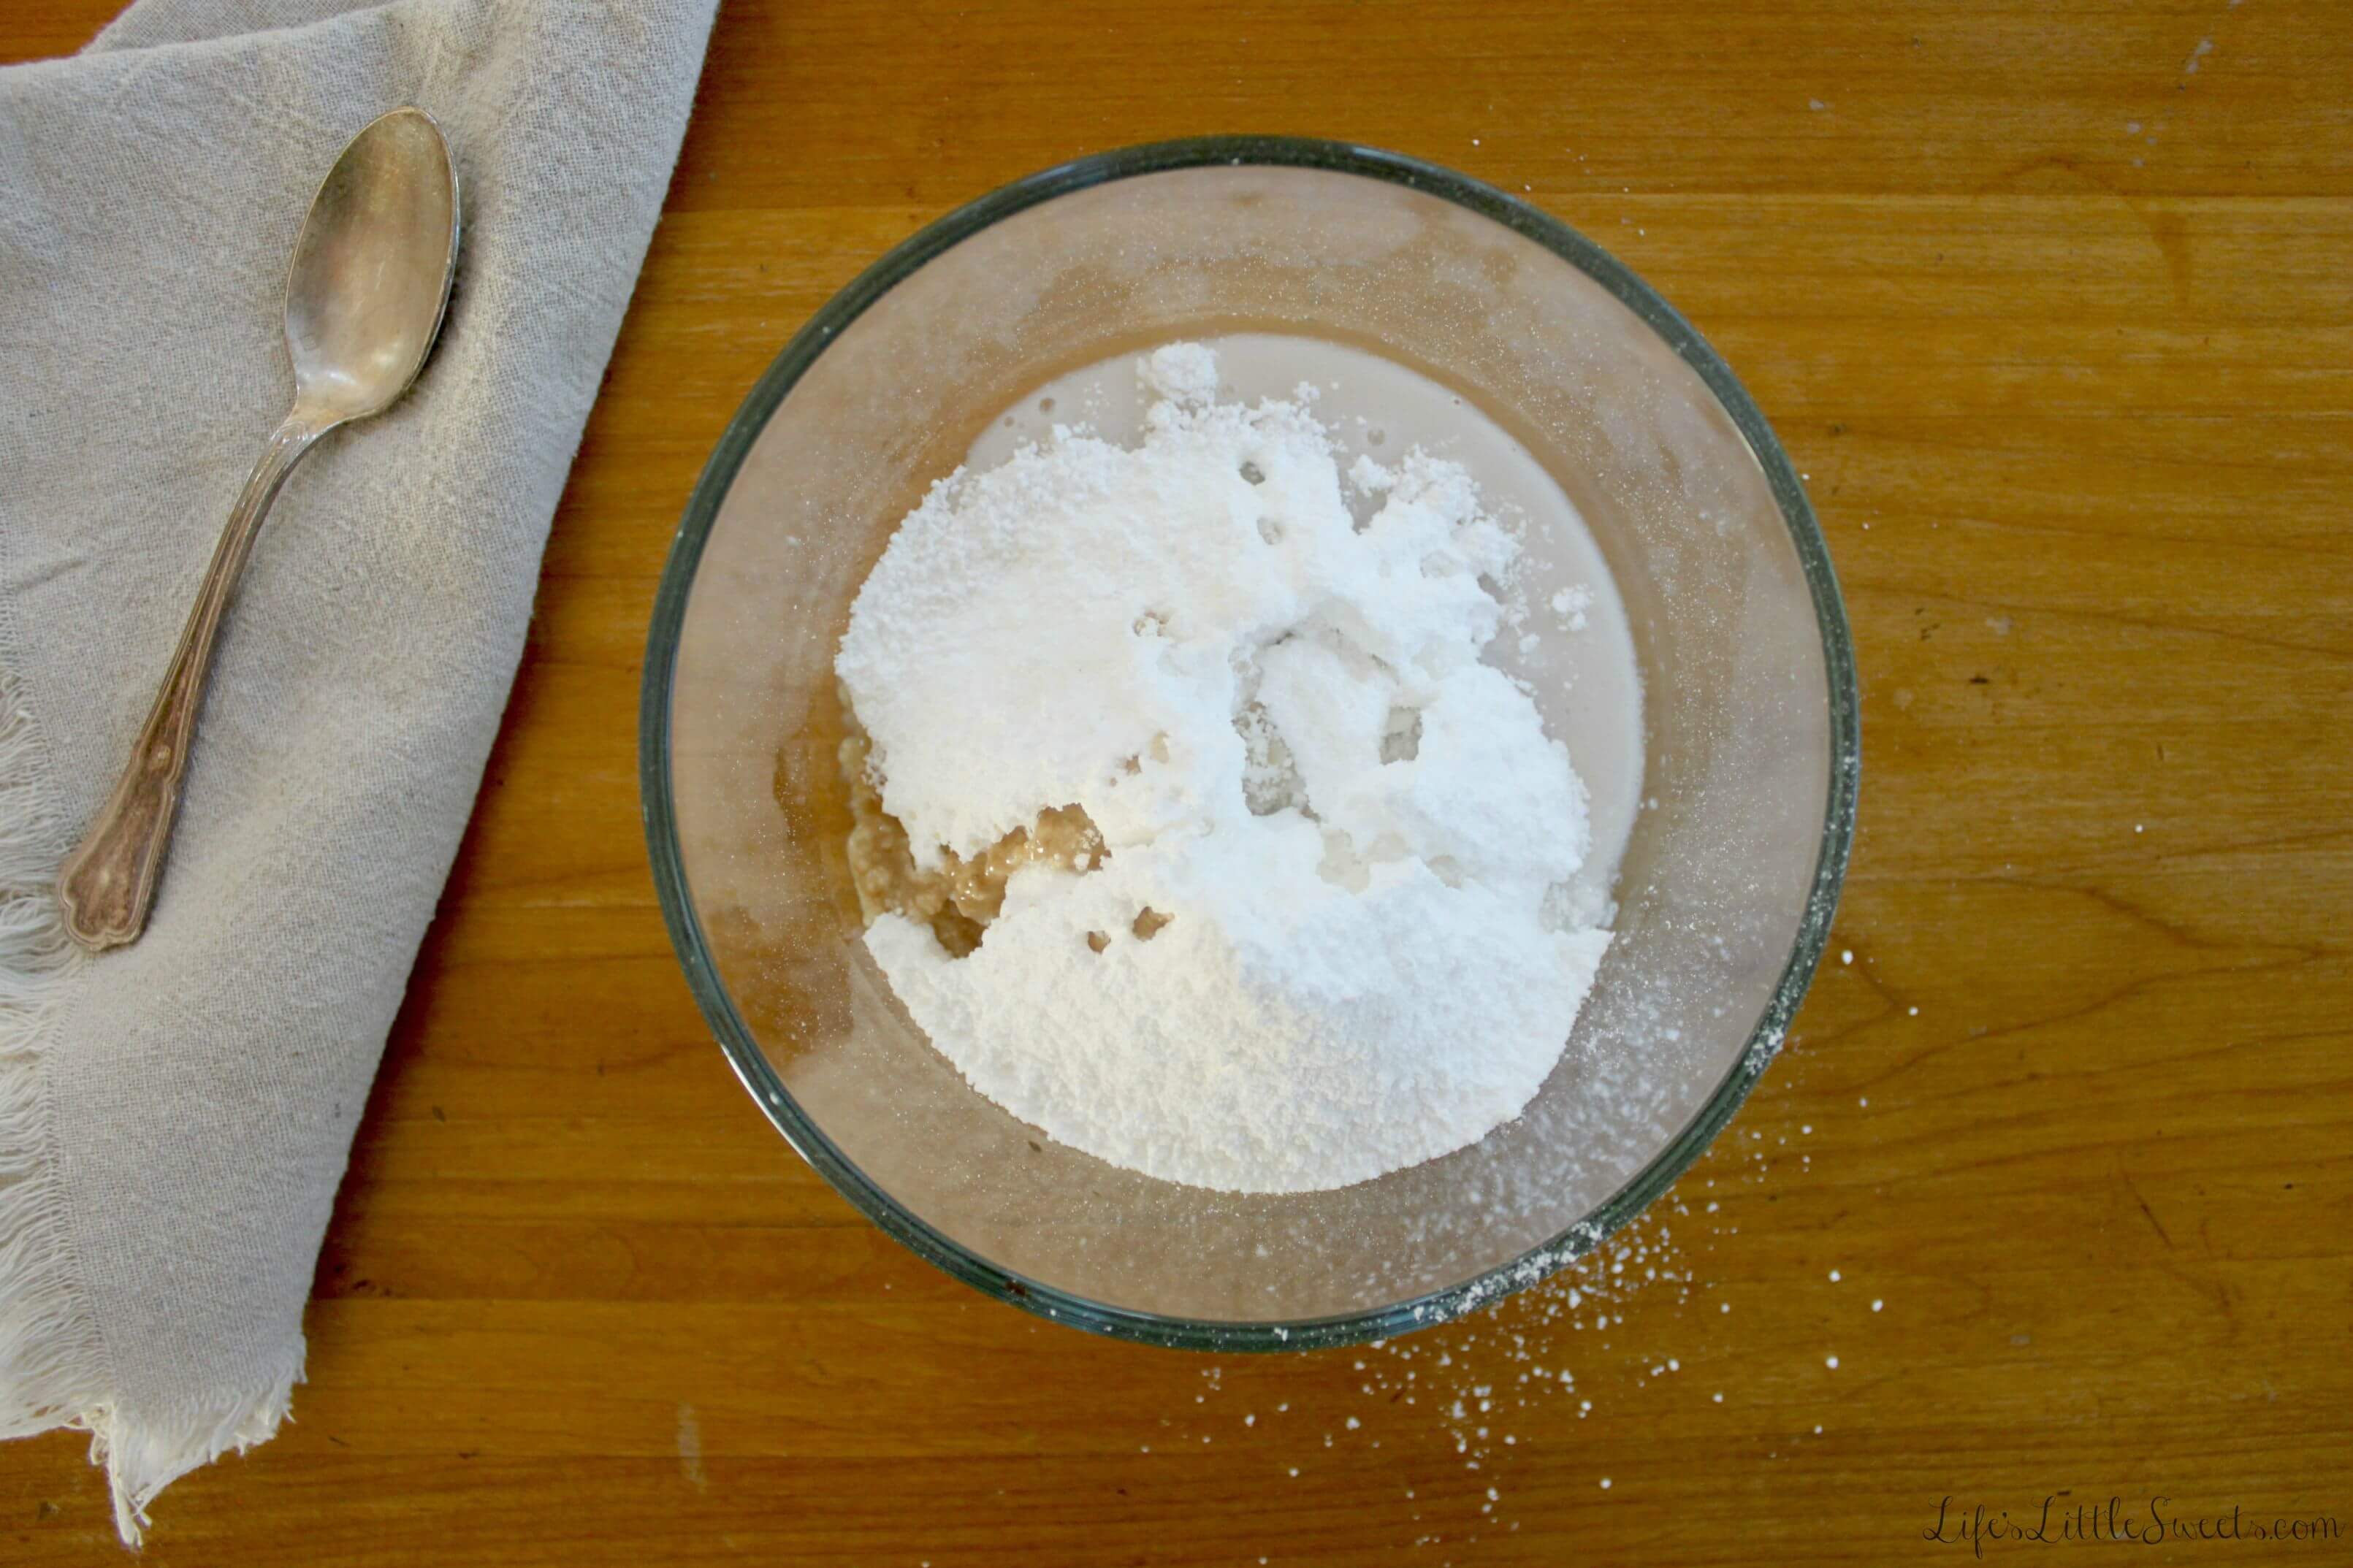 Step 2: Combine Ingredients Vanilla Coconut Icing. Vanilla Coconut Icing is a vegan and gluten-free icing that can be enjoyed on muffins, scones, quick breads, cakes or any number of dessert recipes.